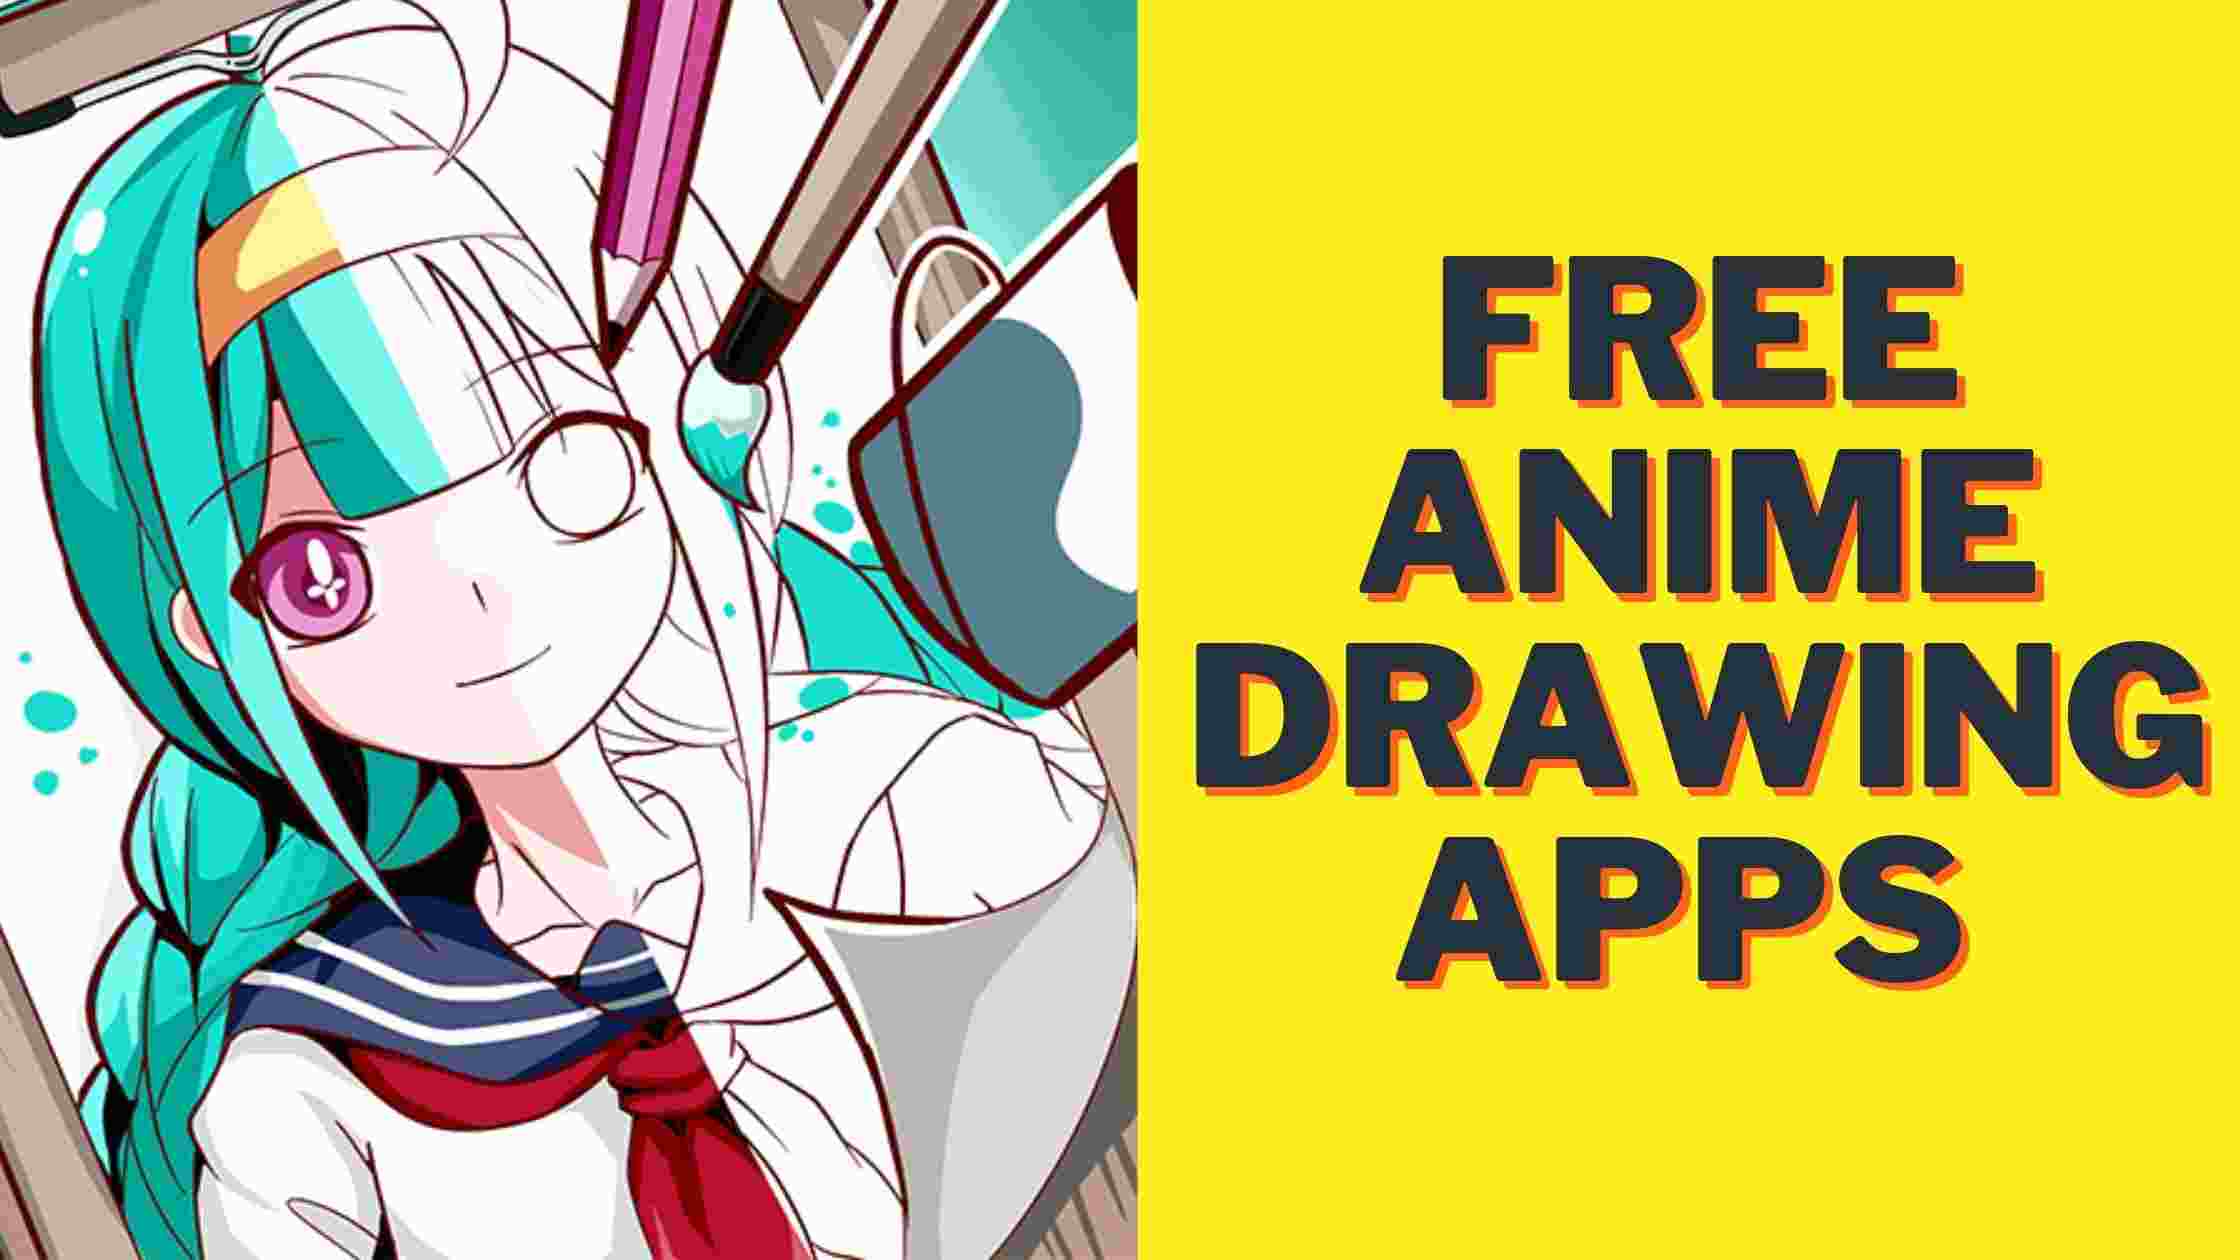 anime drawing apps